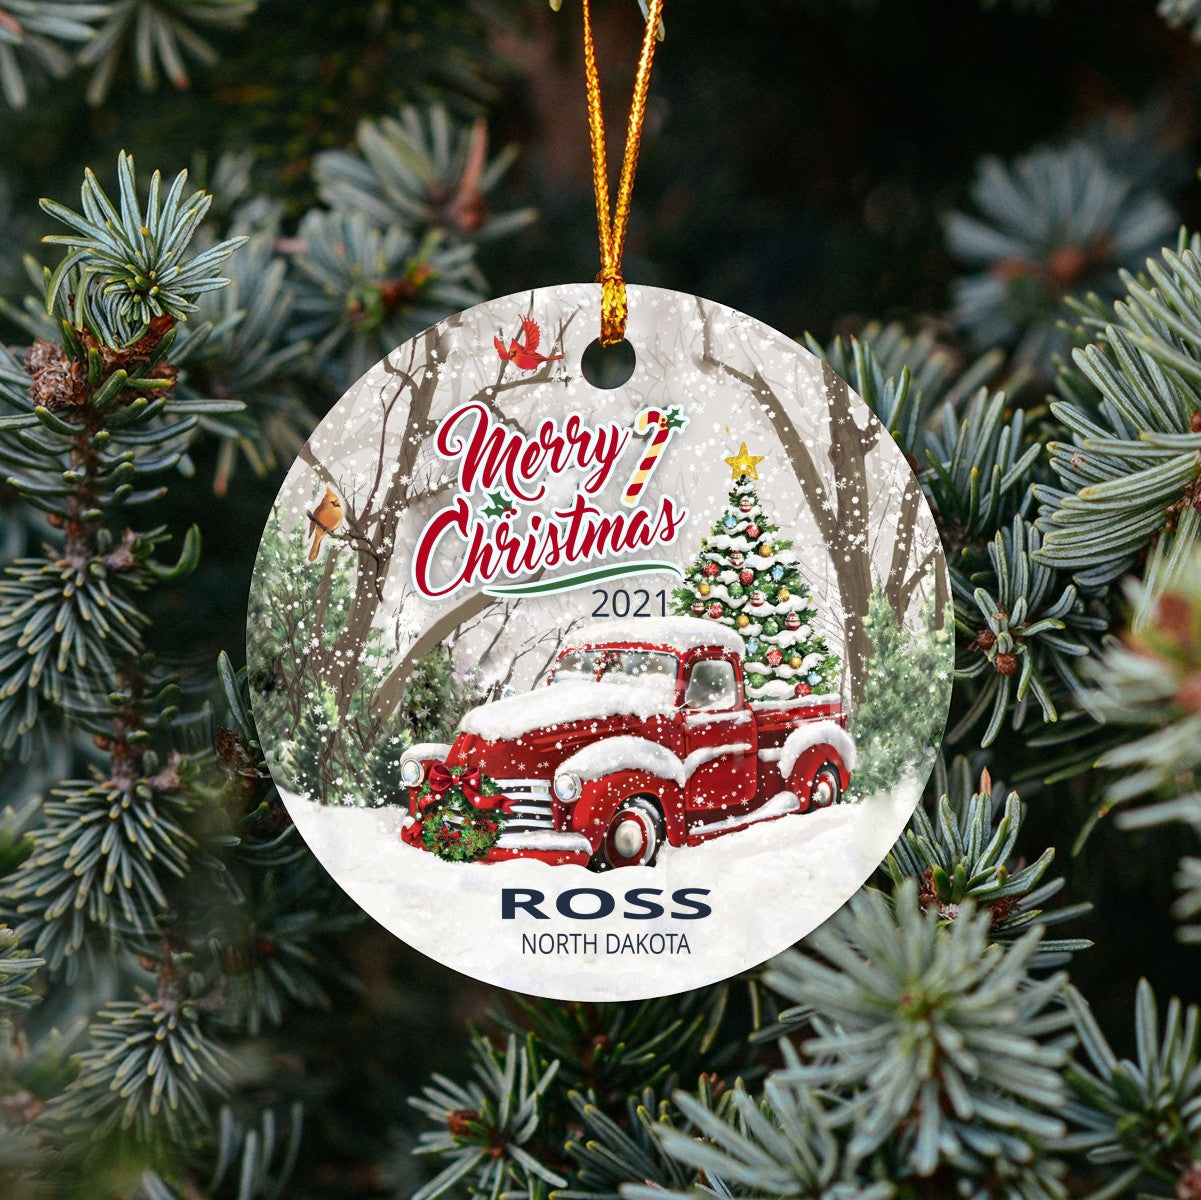 Christmas Tree Ornaments Ross - Ornament With Name City, State Ross North Dakota ND Ornament - Red Truck Xmas Ornaments 3'' Plastic Gift For Family, Friend And Housewarming